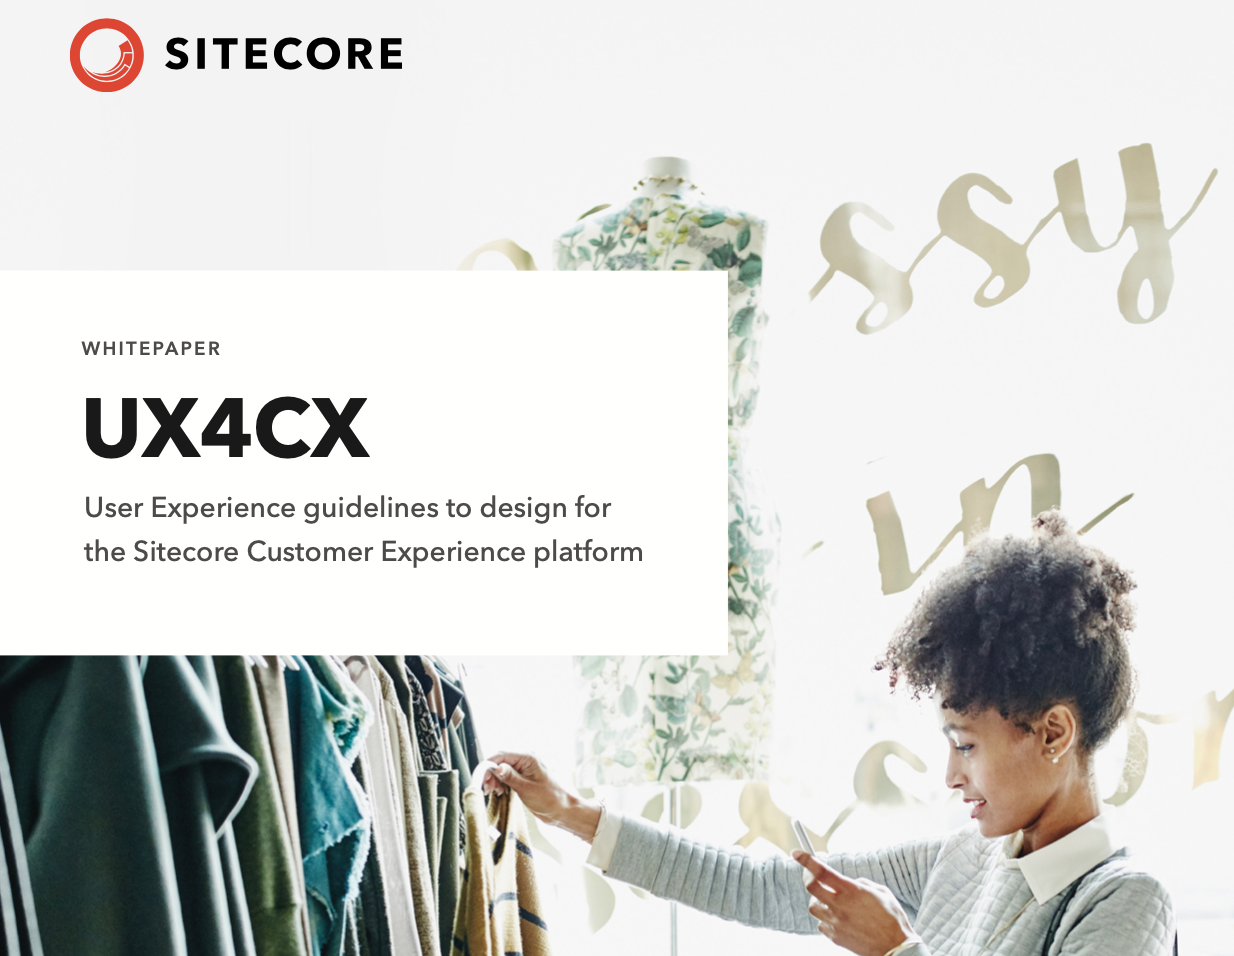 Leveraging user experience within the Sitecore customer experience
platform